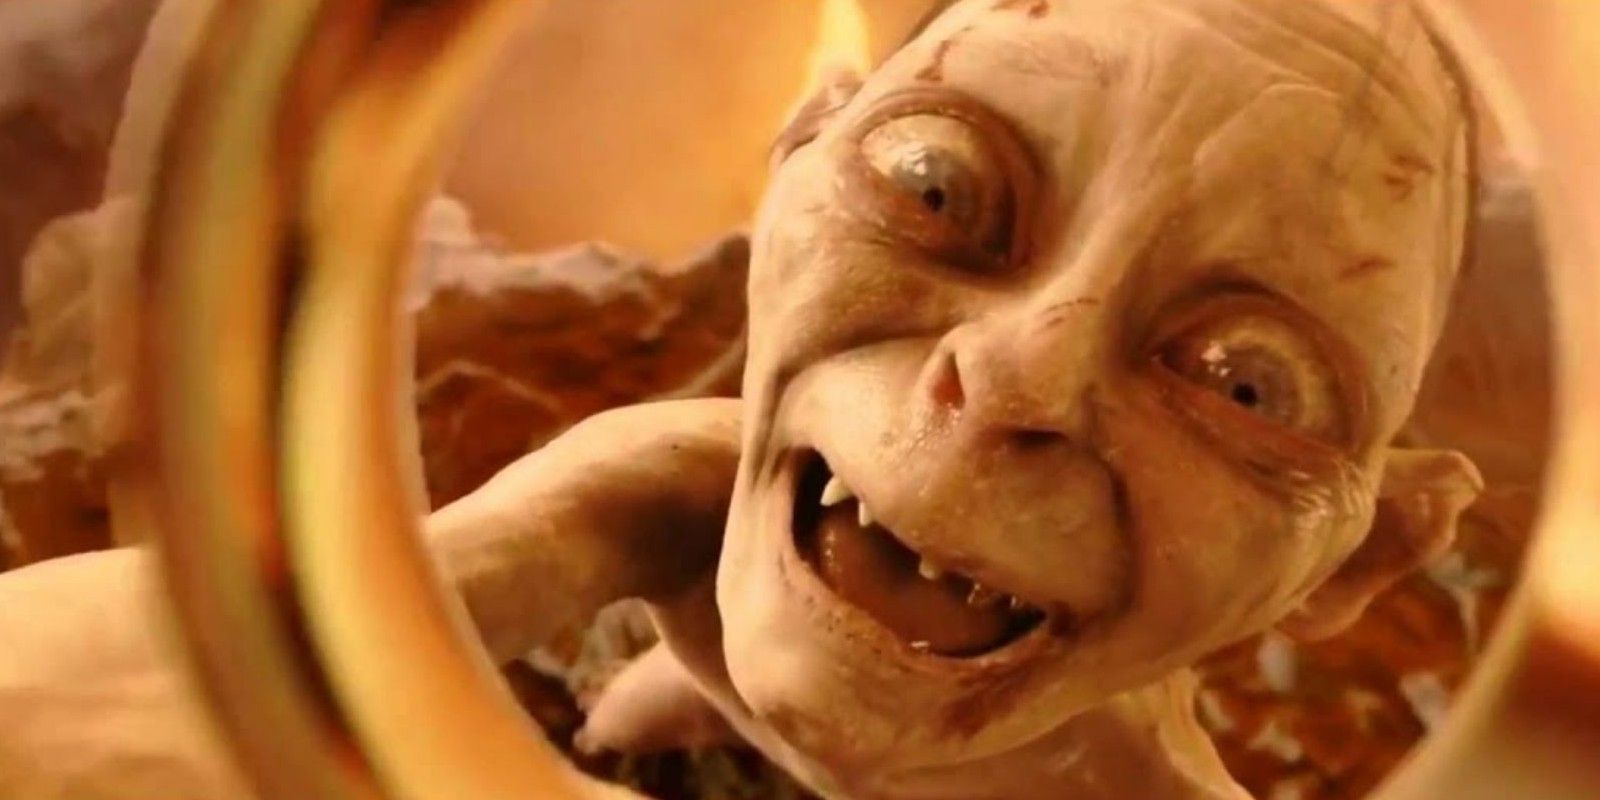 Gollum holding up the One Ring in Lord of the Rings.